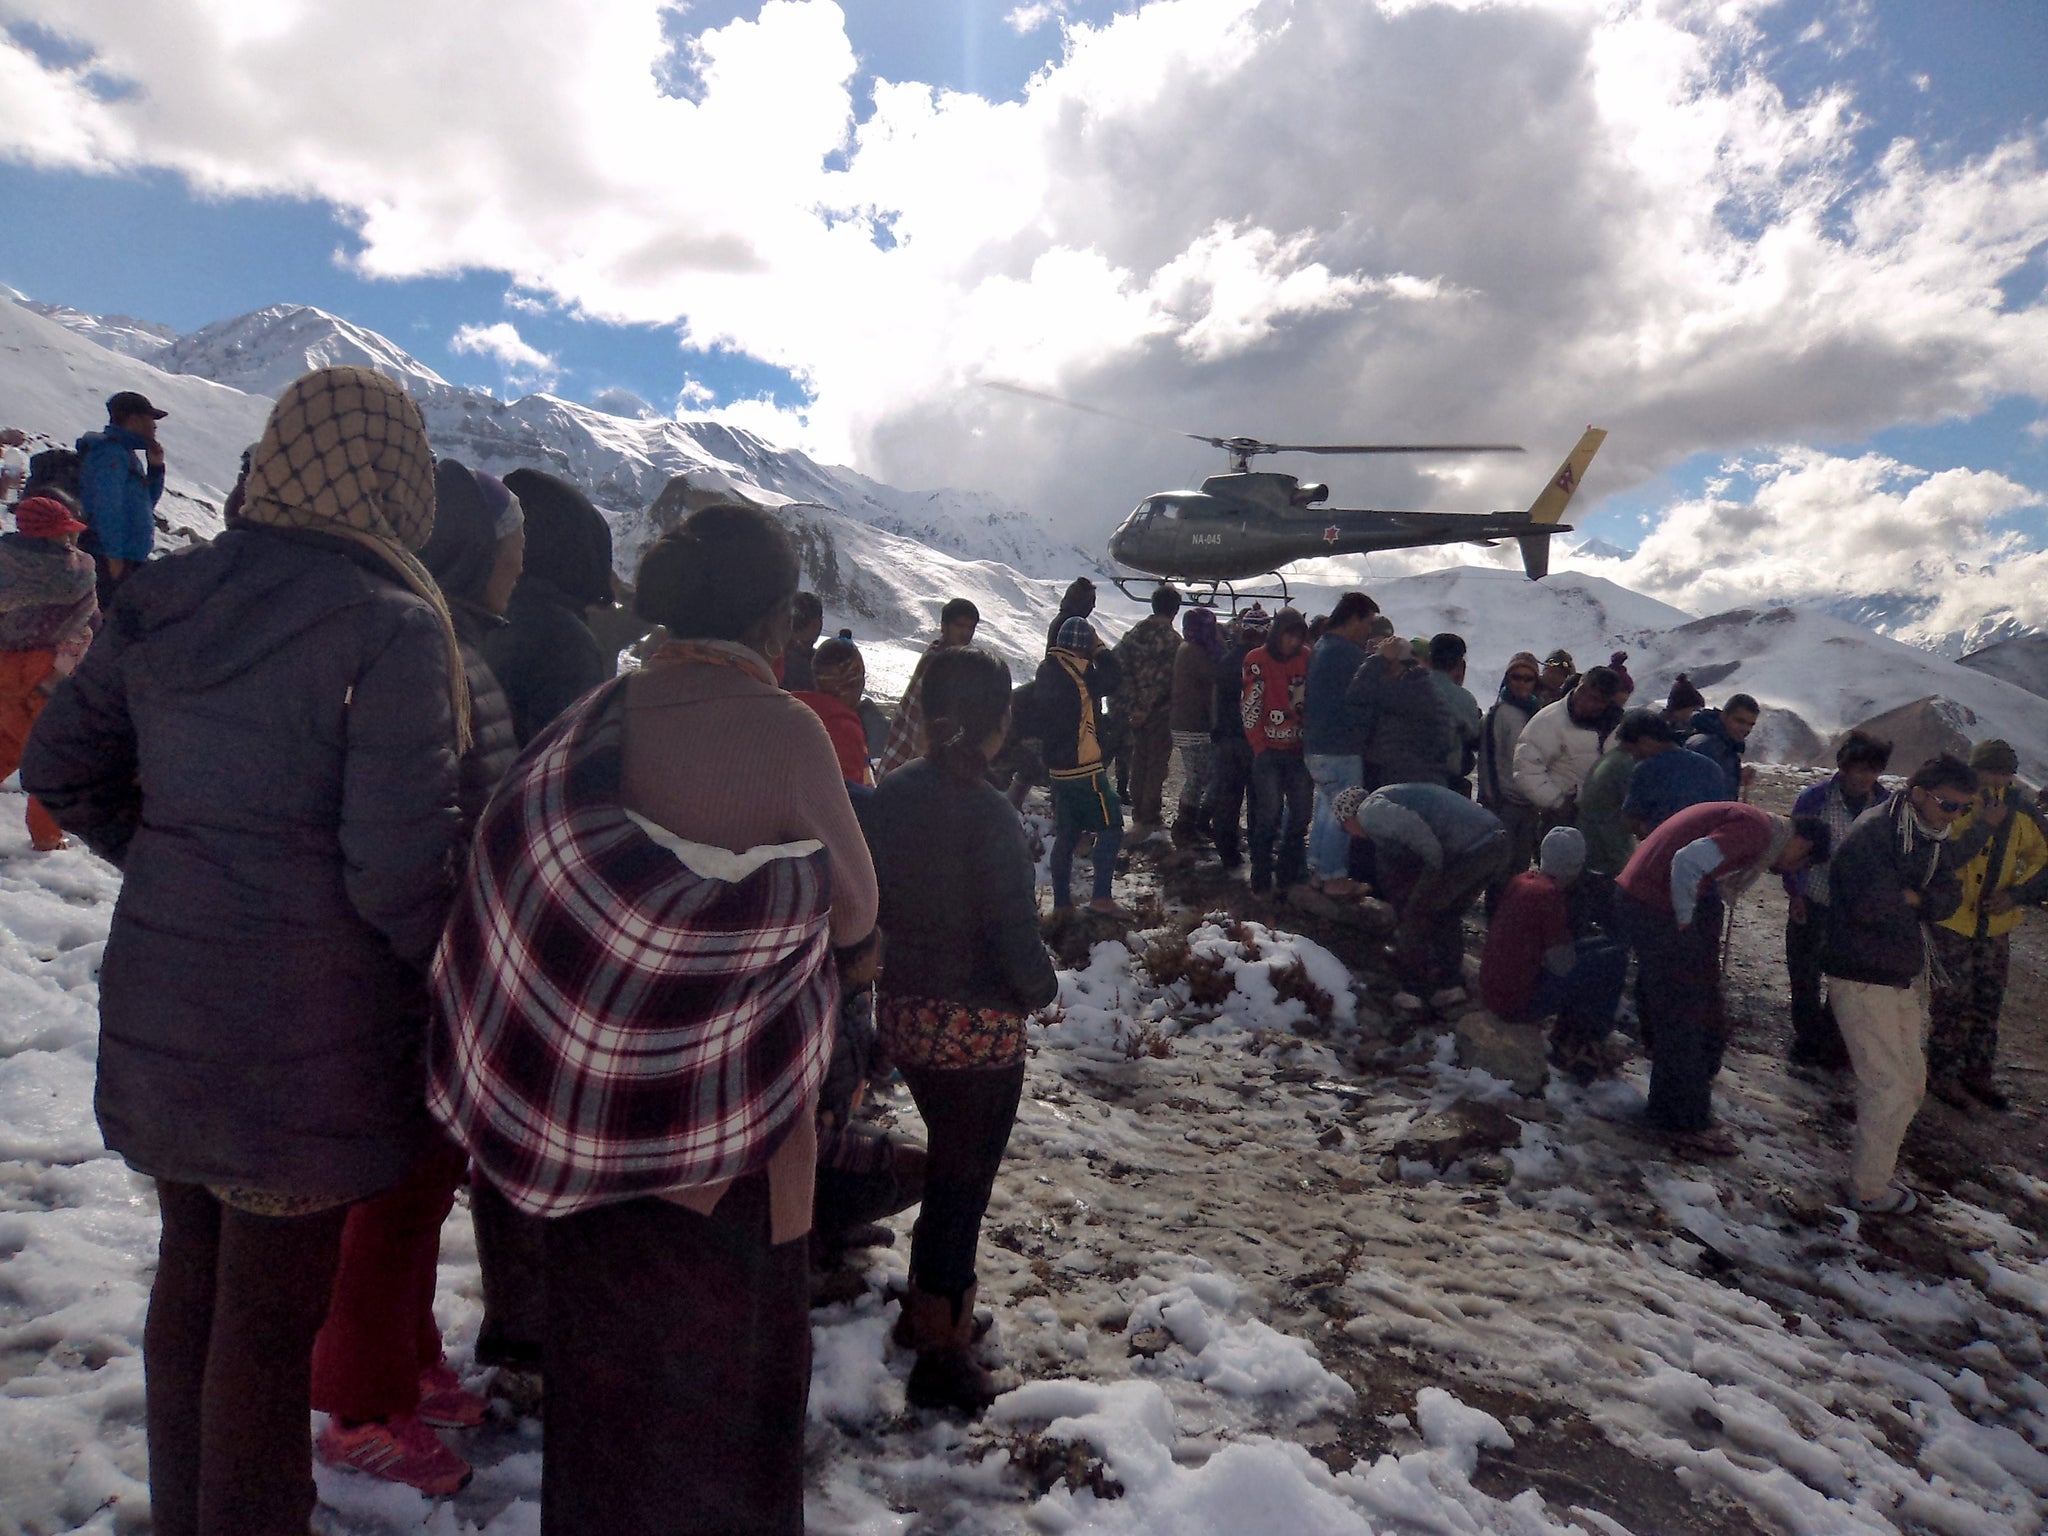 A Nepalese army helicopter rescues survivors of snow storms and avalanches which have killed at least 32 trekkers and guides on the Annapurna trail this week; scores of people are still missing